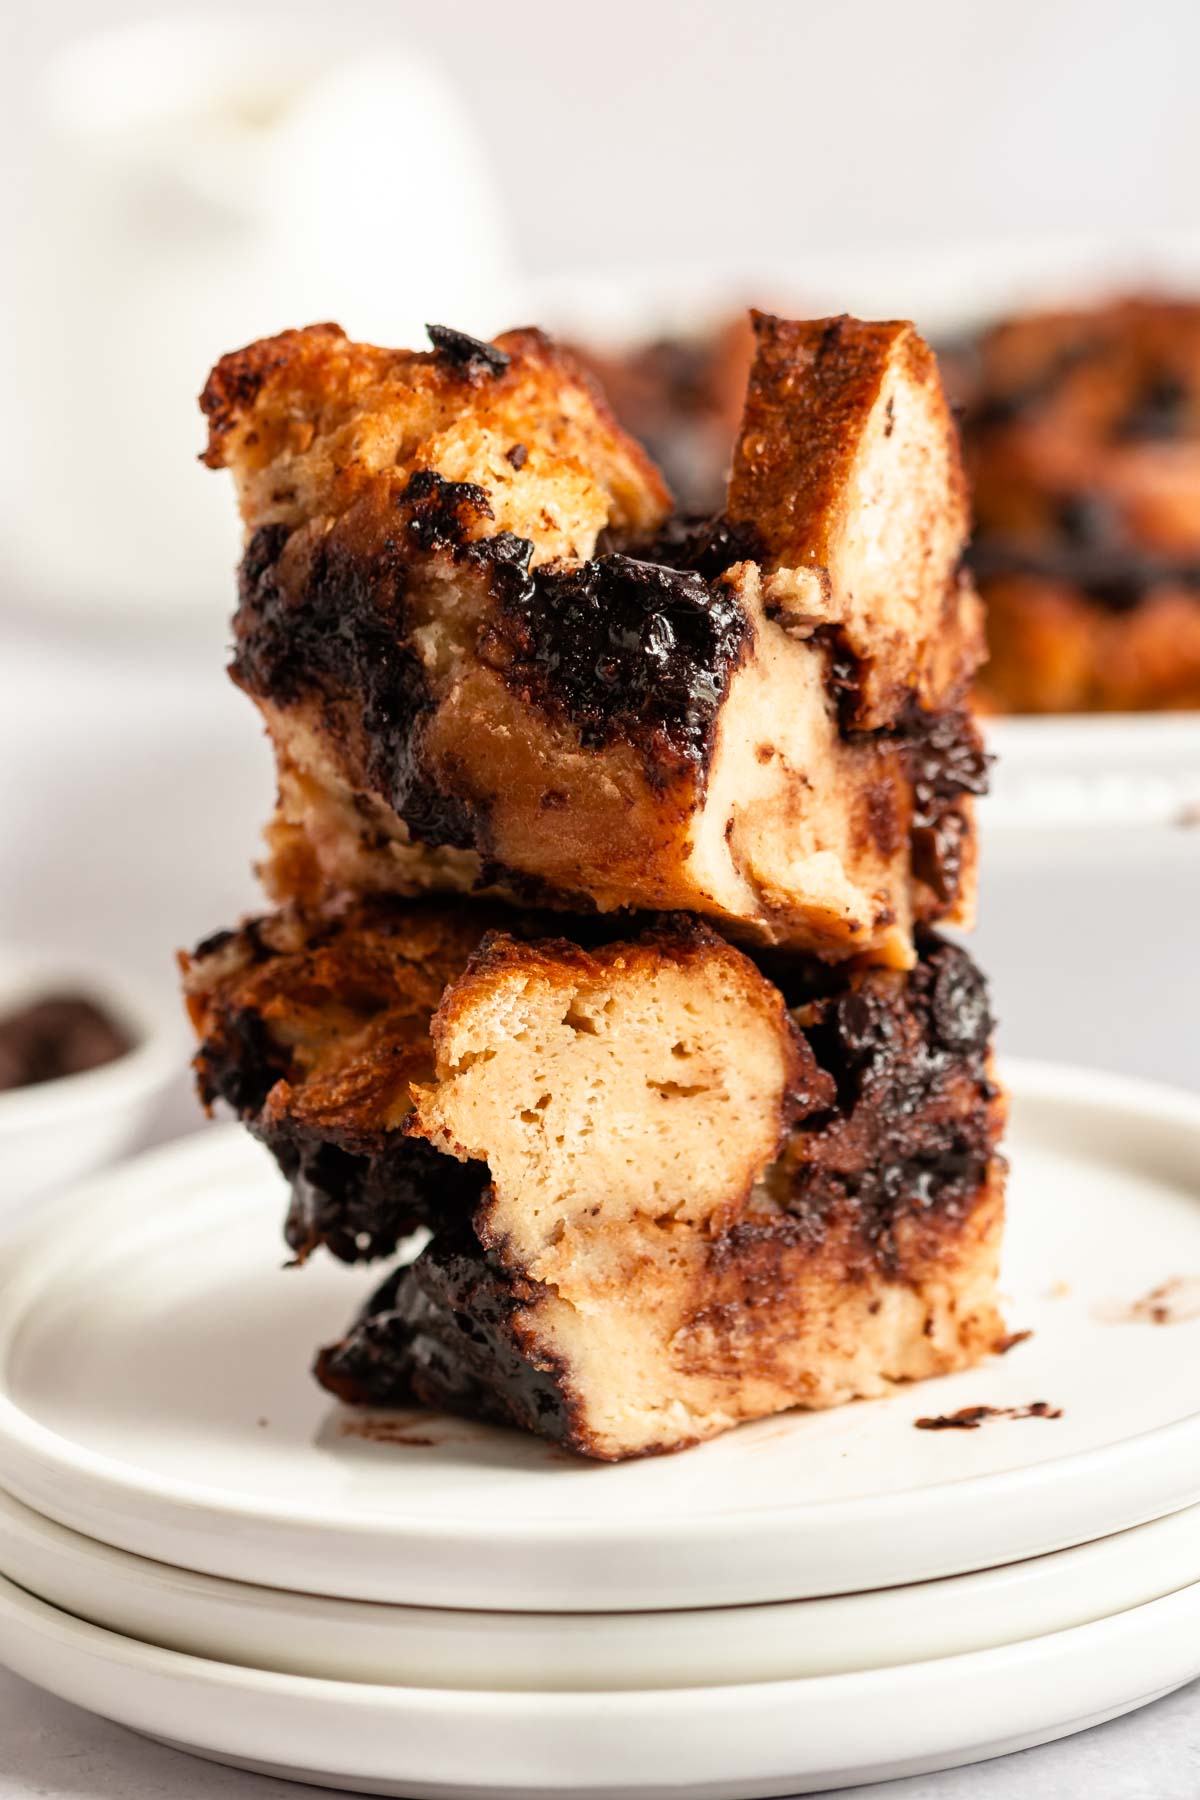 Stack of two sliced of chocolate chip bread pudding.